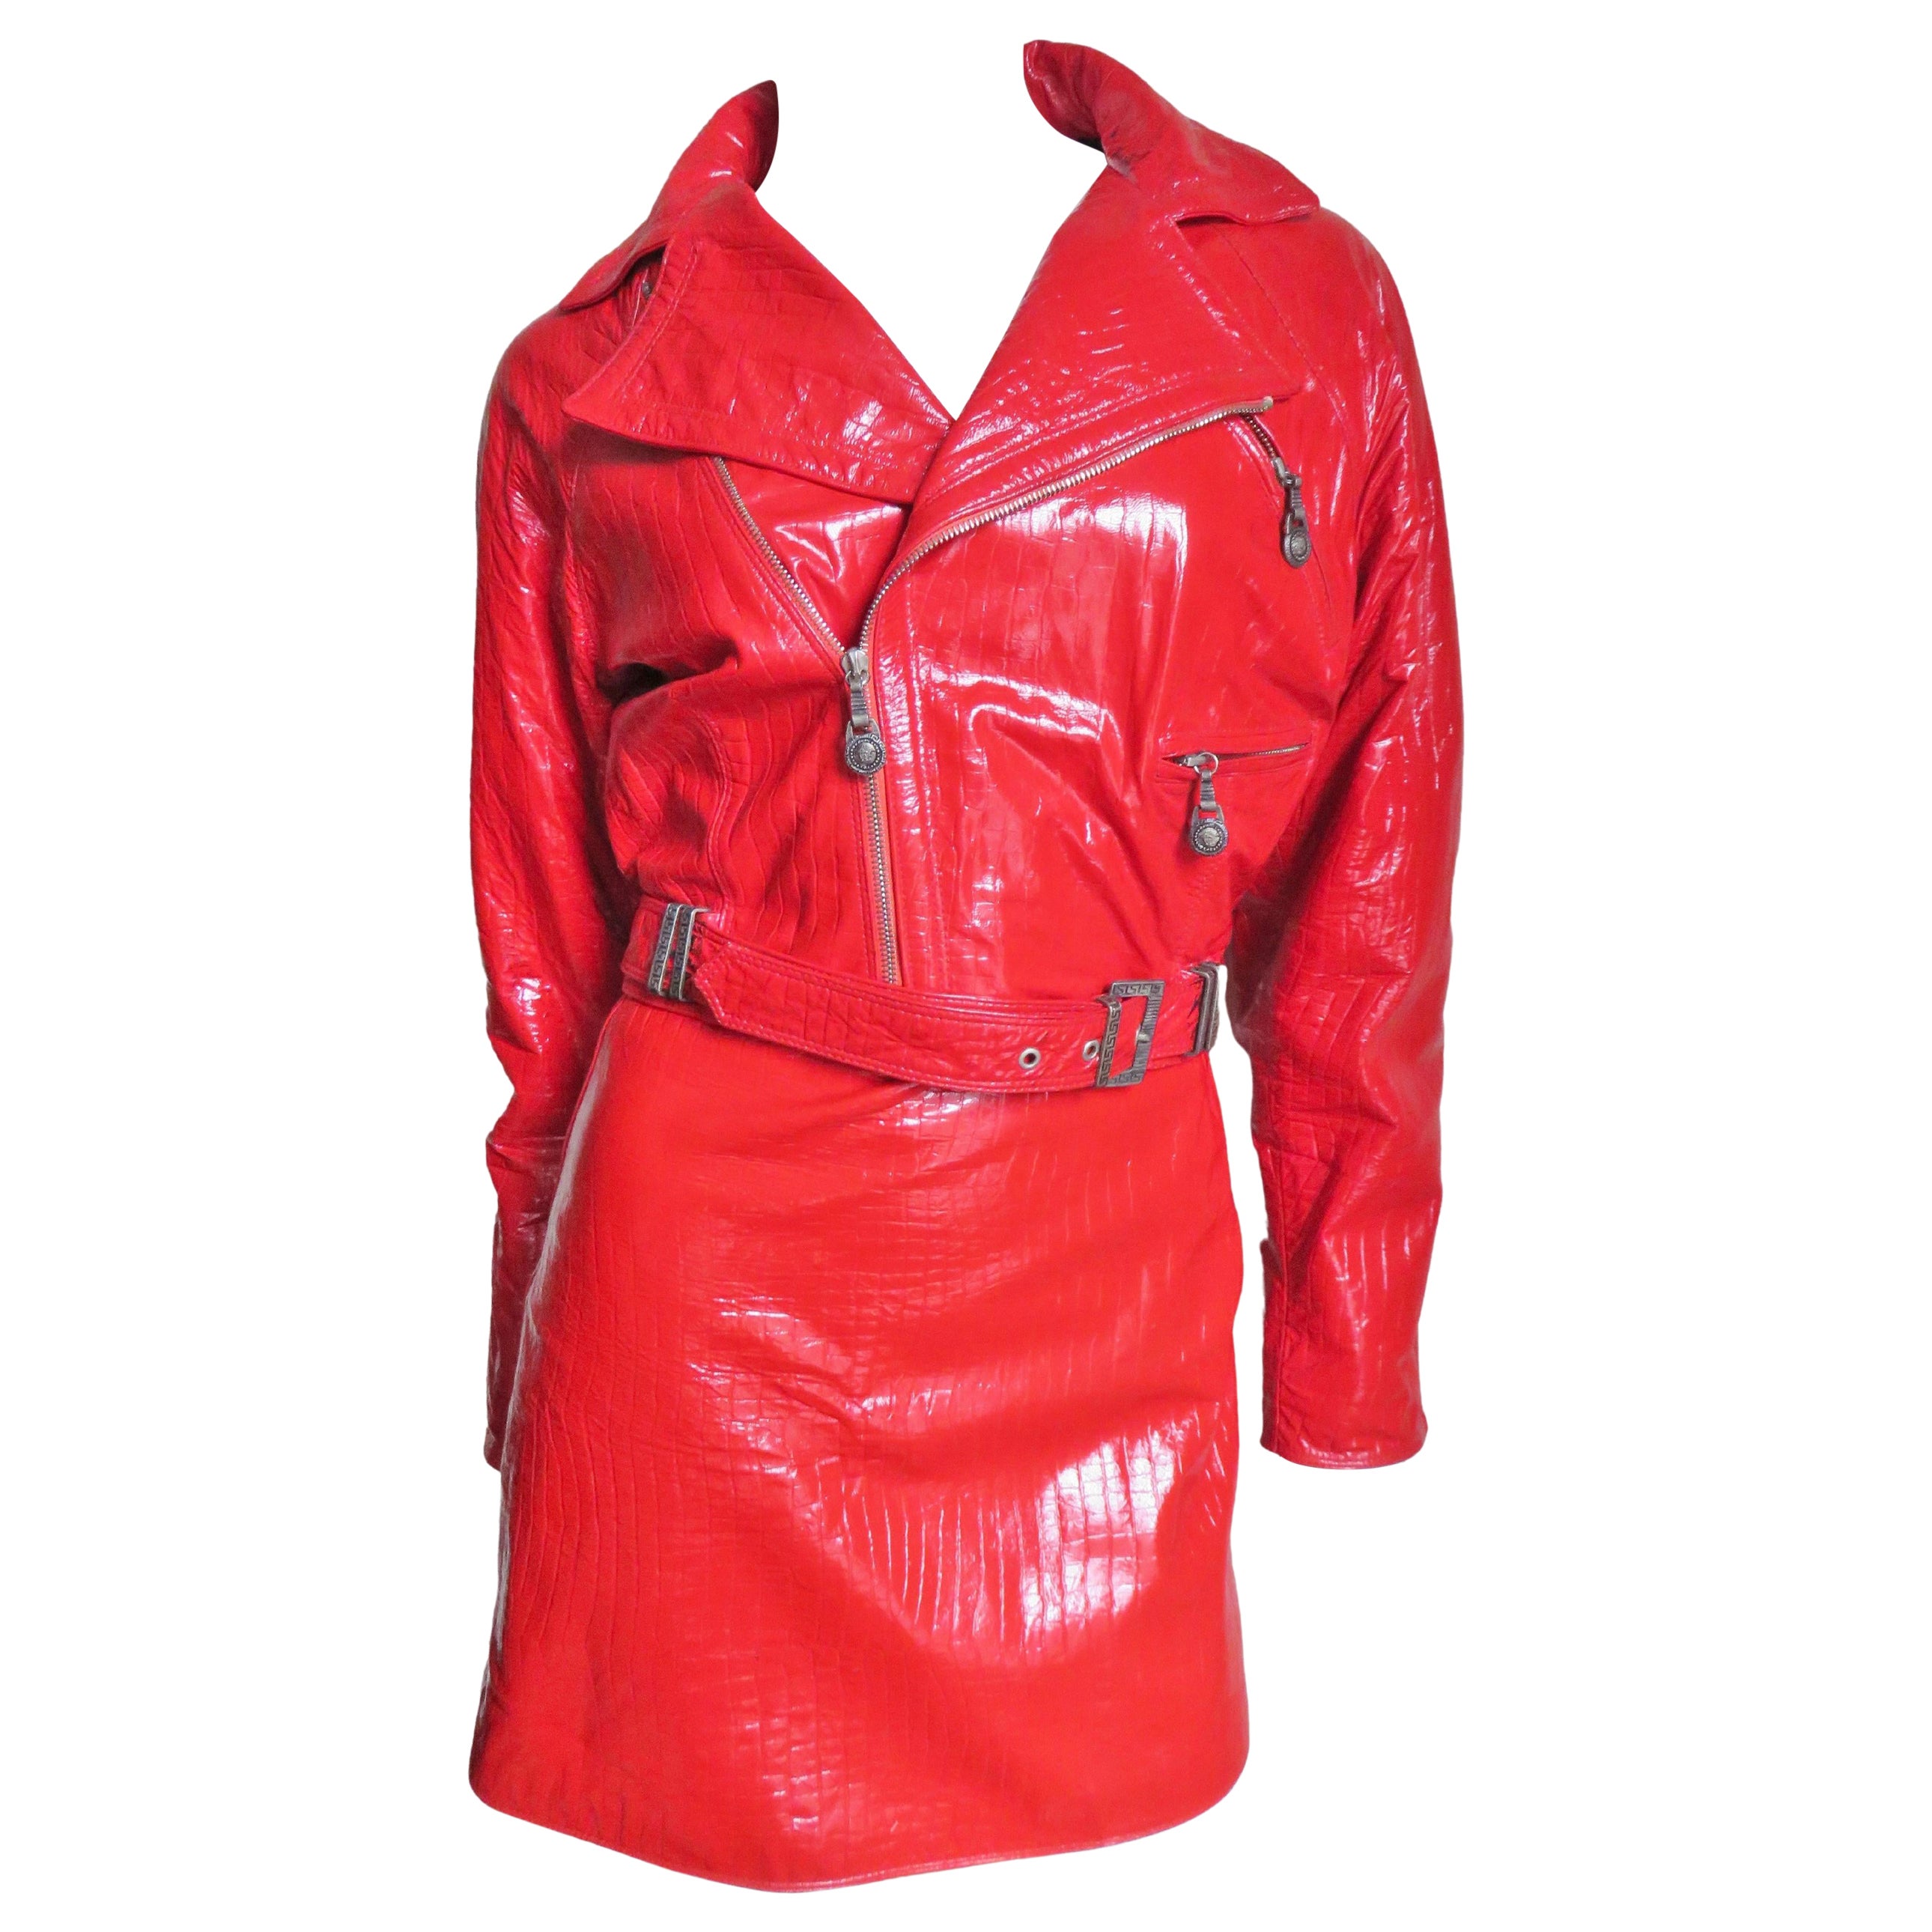 Gianni Versace Red Leather Motorcycle Jacket and Skirt A/W 1994